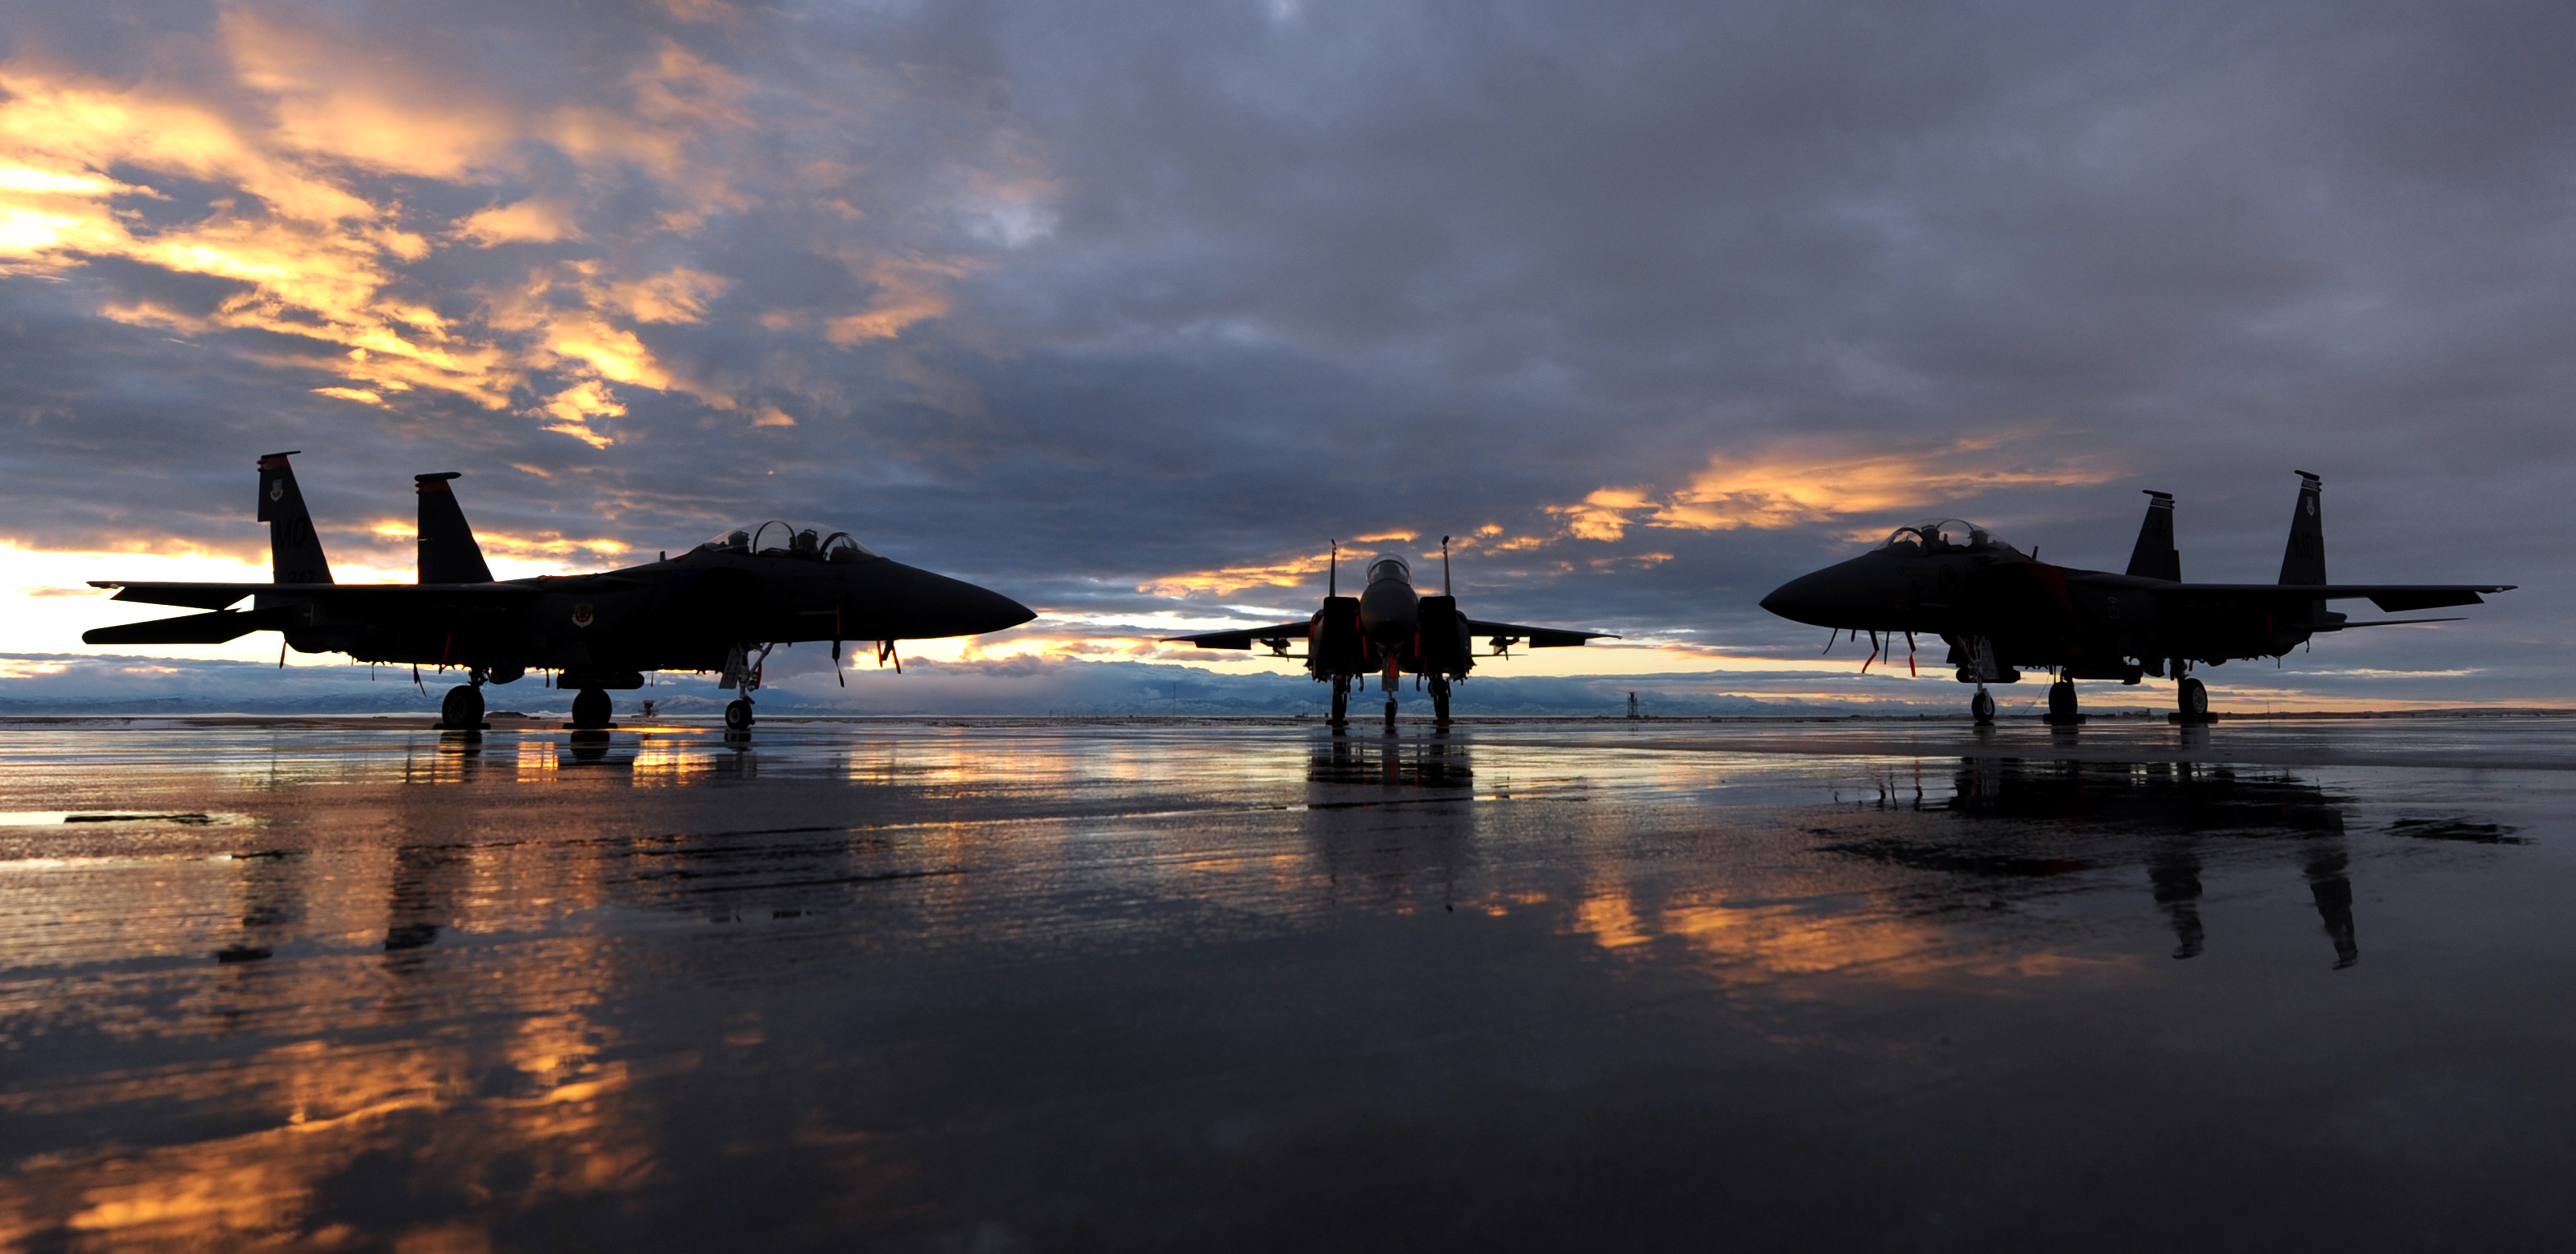 Two F-15E Strike Eagles assigned to the 391st and 389th Fighter Squadrons and one F-15SG assigned to the 428th Fighter Squadron sit on the flightline during sunset